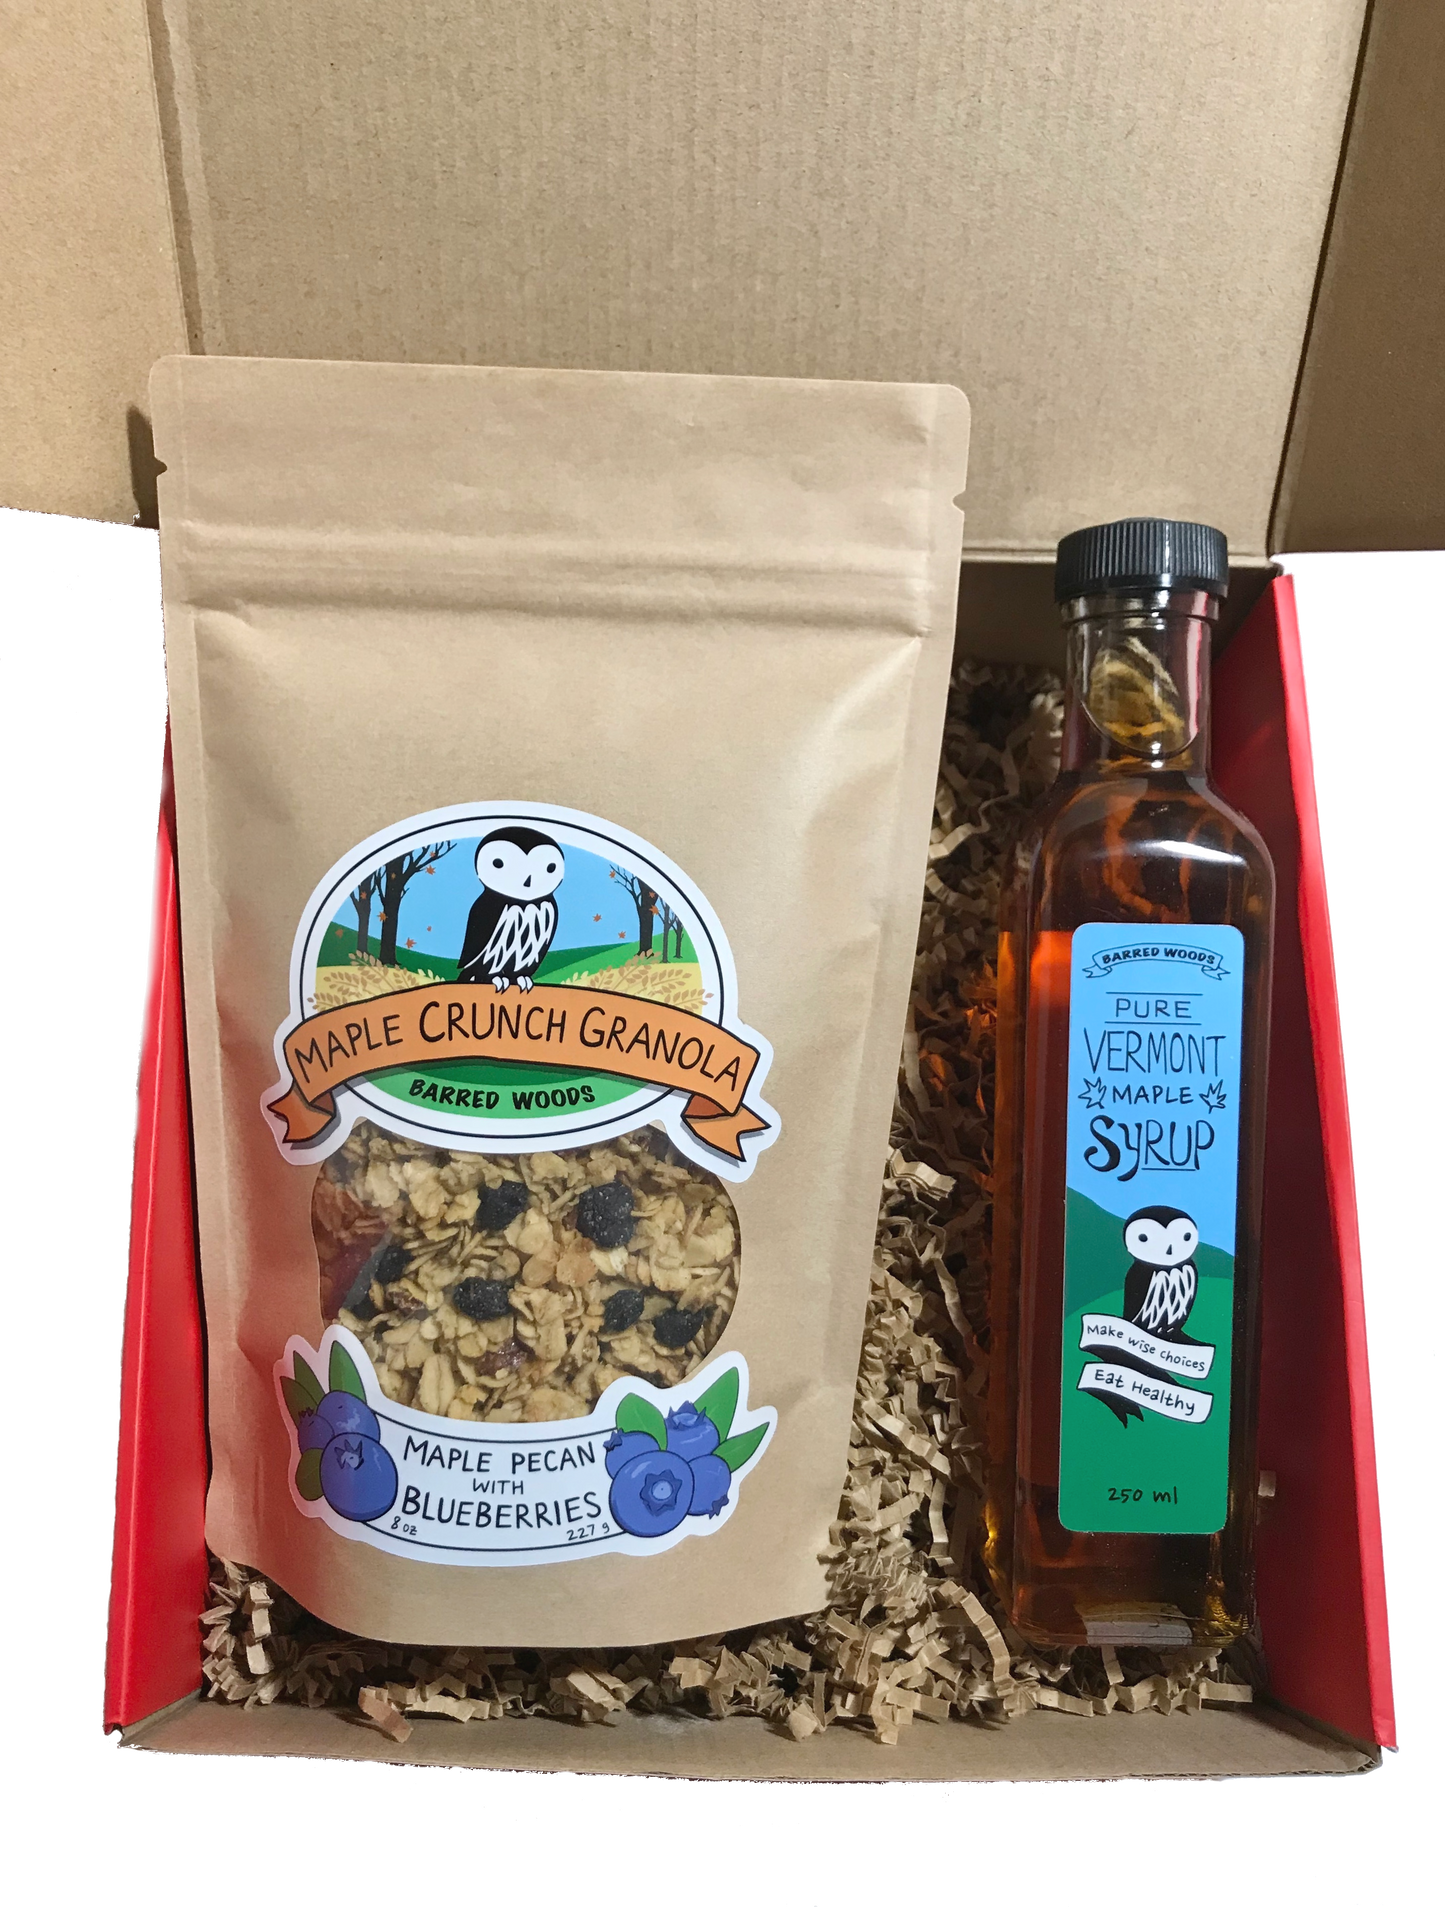 
                  
                    Maple Gift Box with 250ml Bottle of Maple Syrup and an 8 oz Bag of Maple Crunch Granola - Medium Red Gift Box - Barred Woods Maple
                  
                